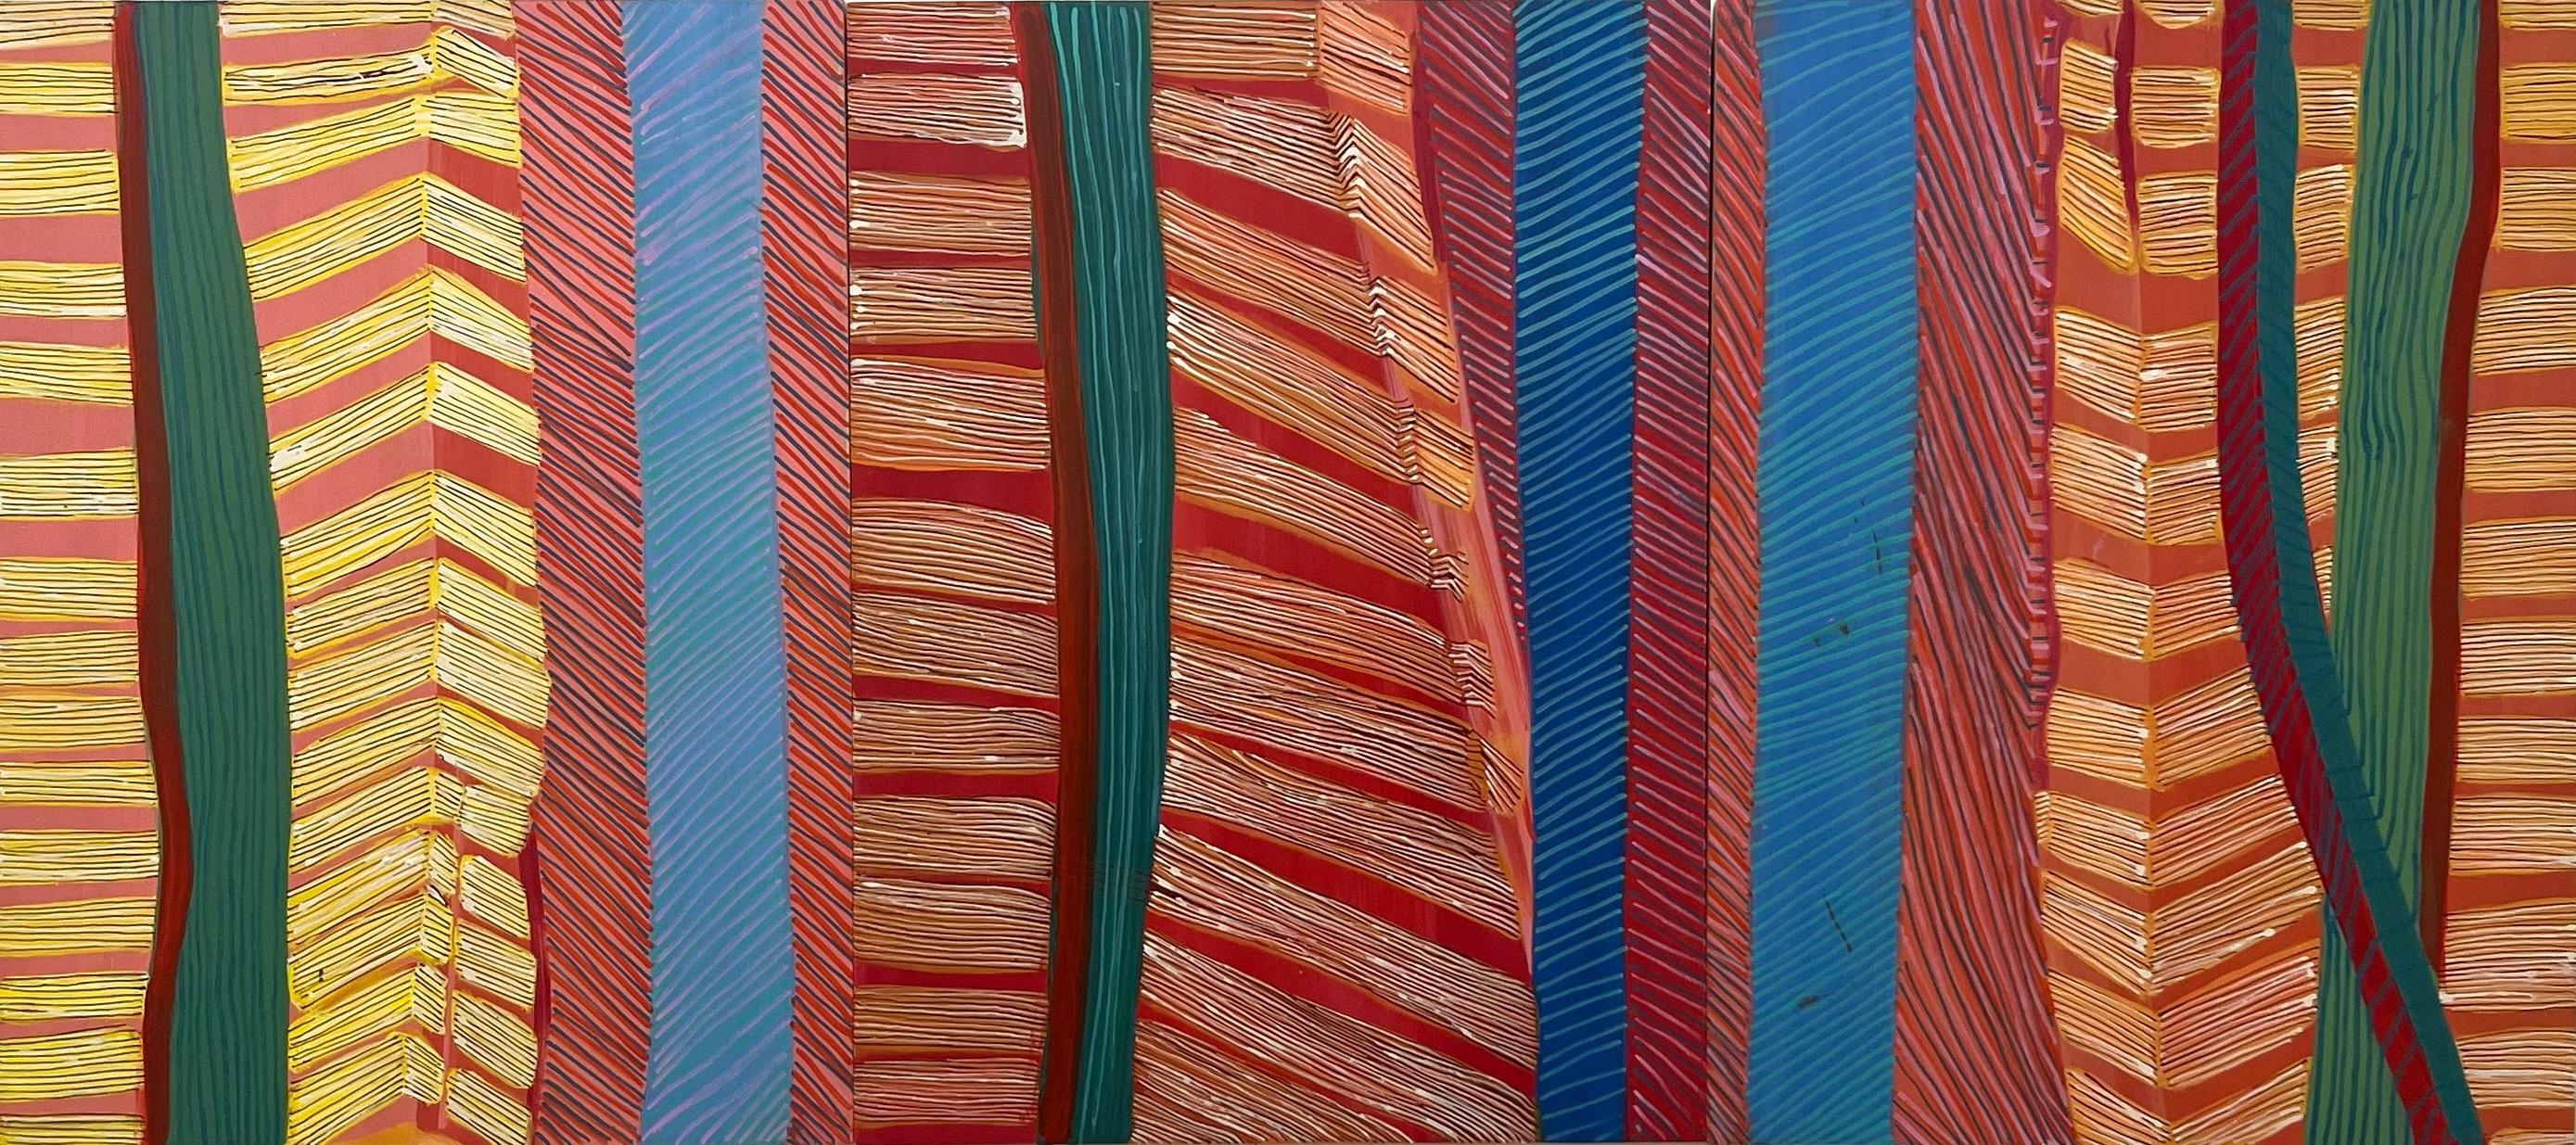 Cynthia Rojas creates her paintings with an insistent, intuitive line and colorful, eccentric shapes. Annual trips to Mexico have had a major influence on her  palette and vintage textiles, architectural motifs and aerial landscape views influence